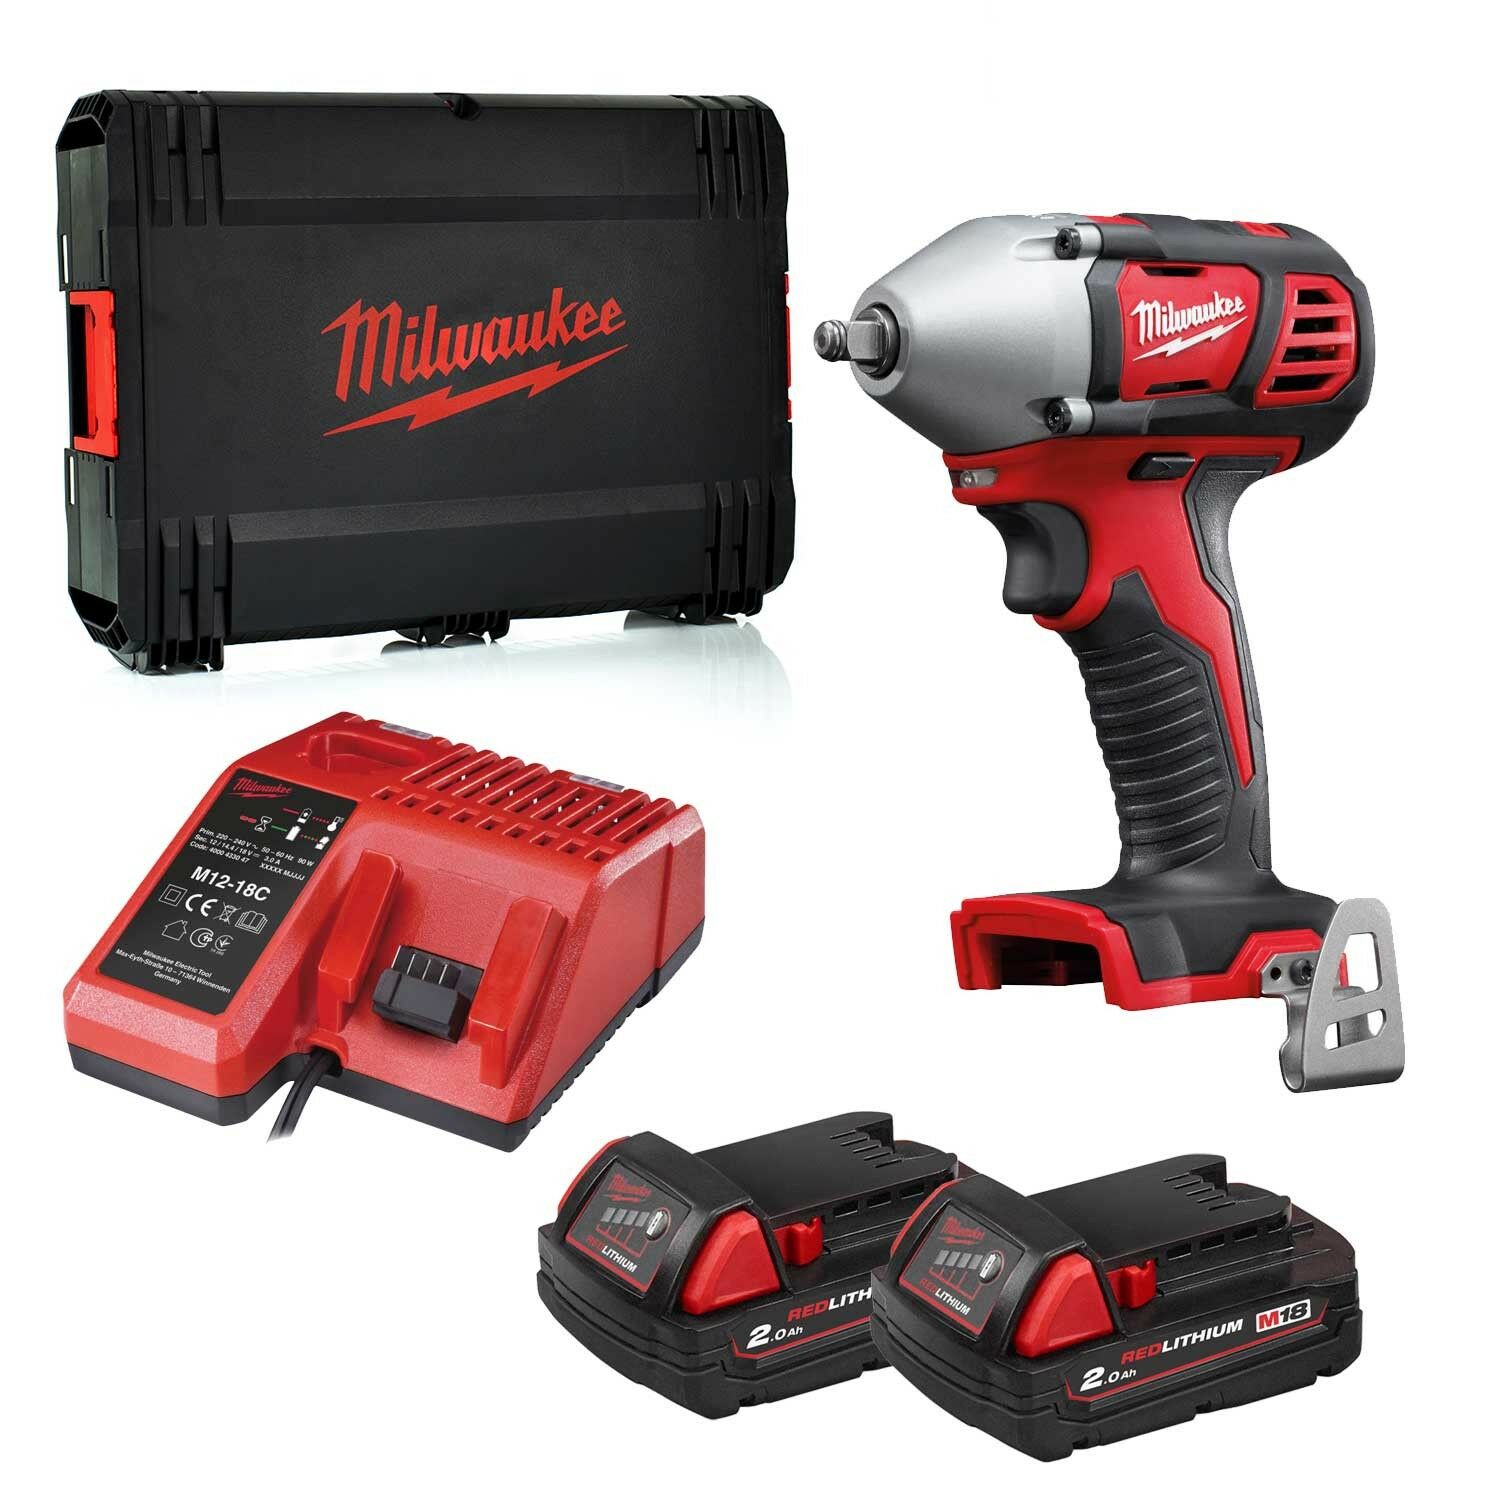 Milwaukee M18BIW38-202C M18 18V 3/8" 210Nm Impact Wrench Kit - 2x 2Ah Batteries, Charger and Case